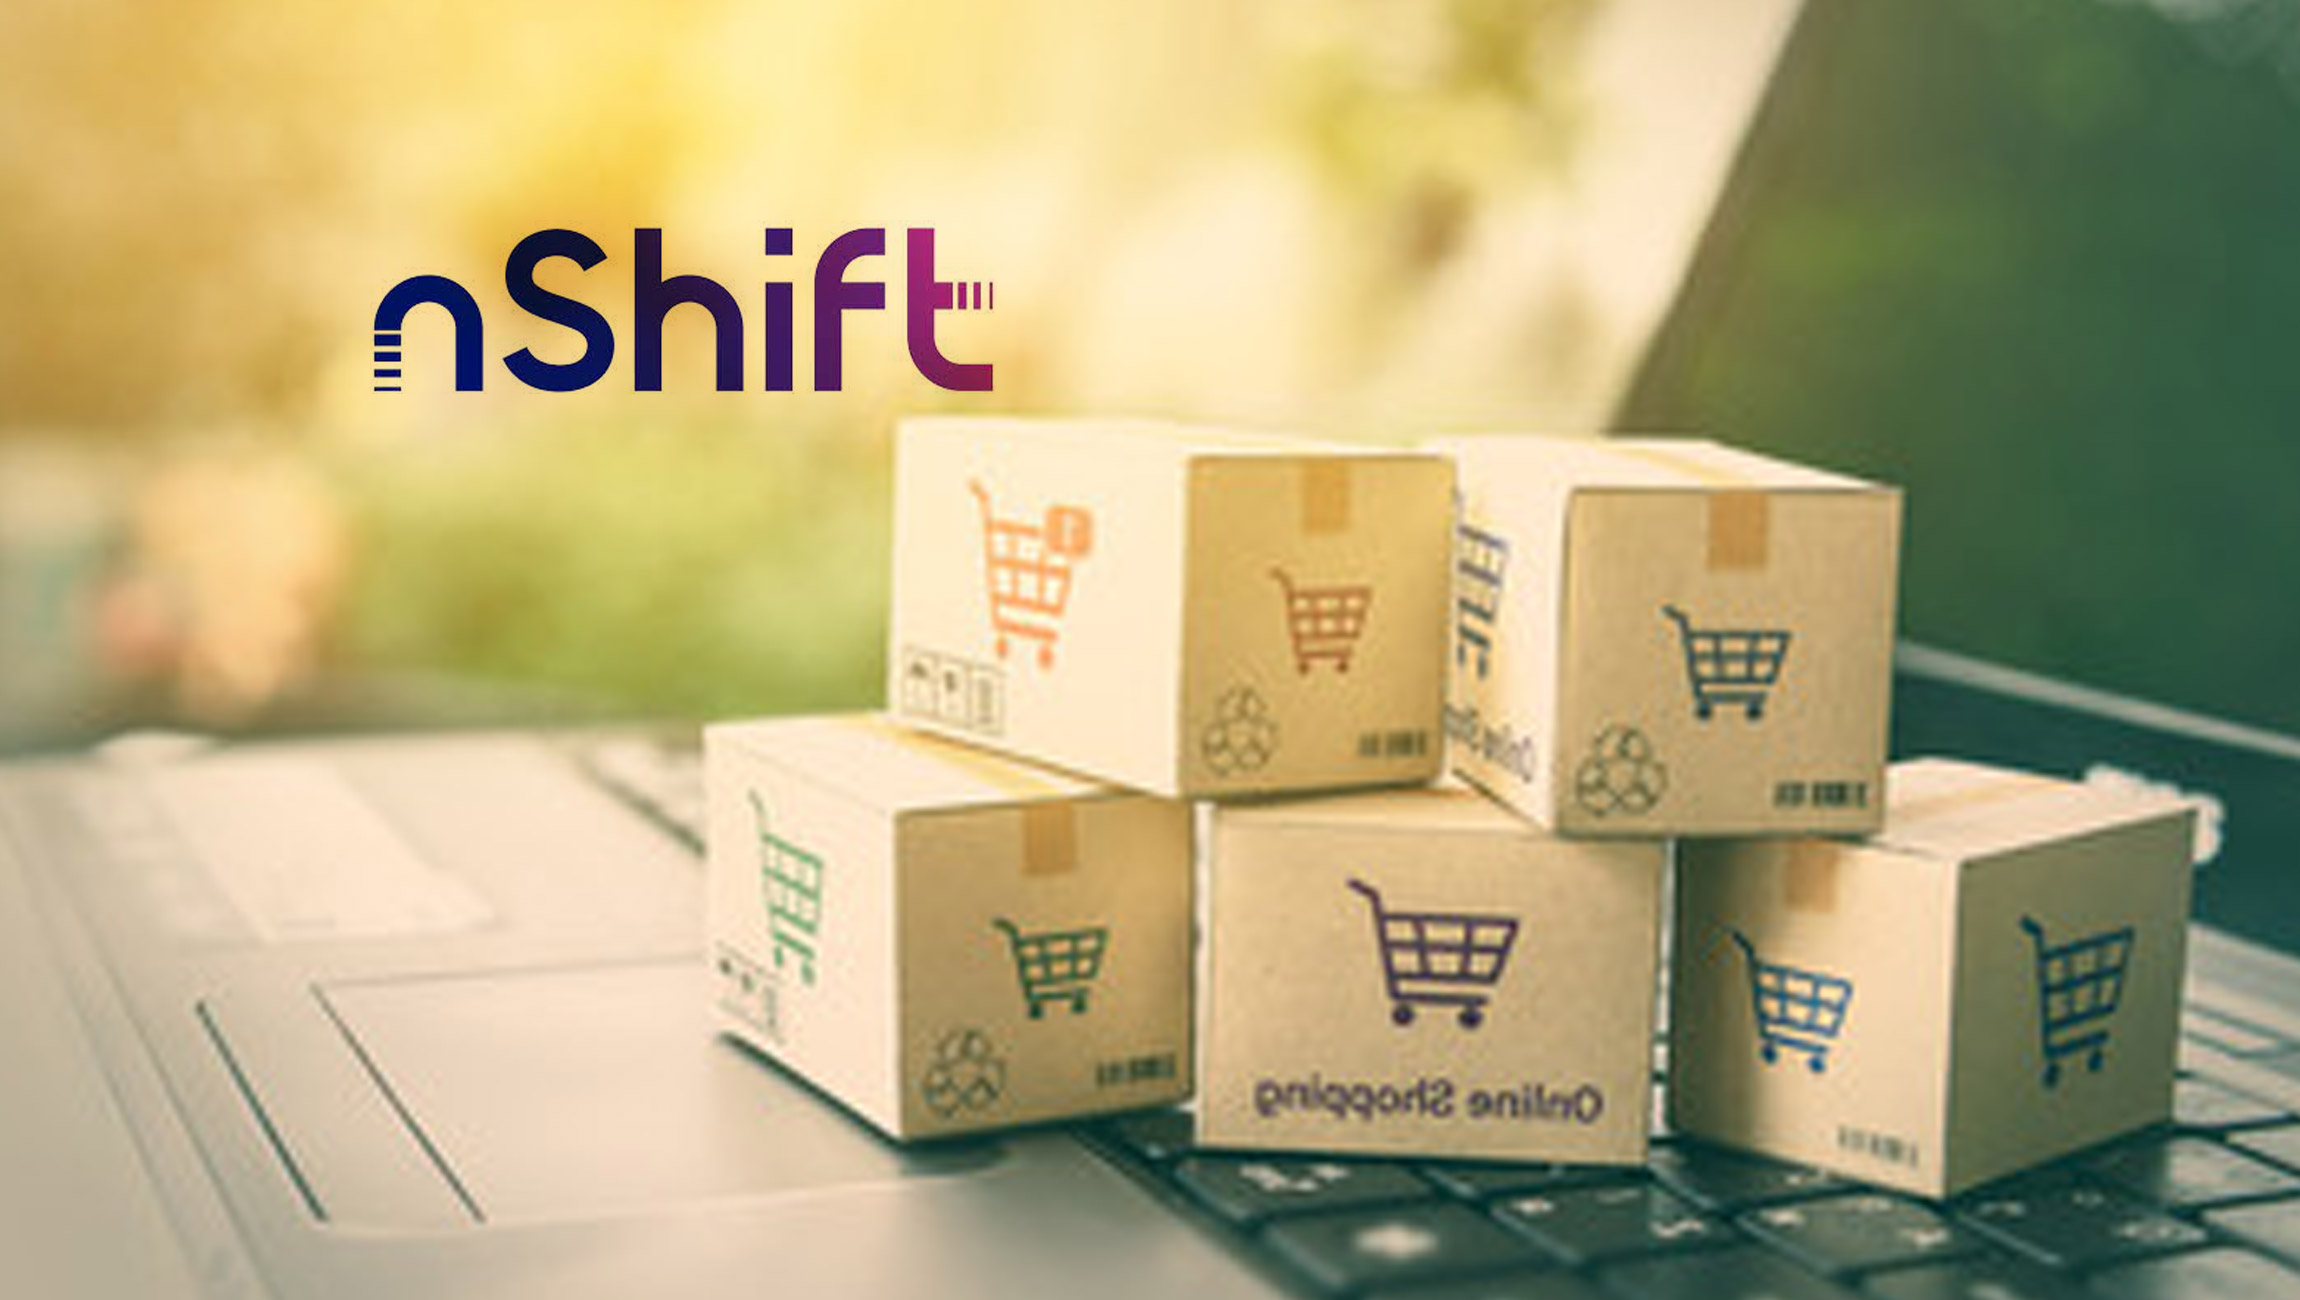 nShift releases four steps toward sustainable shipping ahead of Black Friday